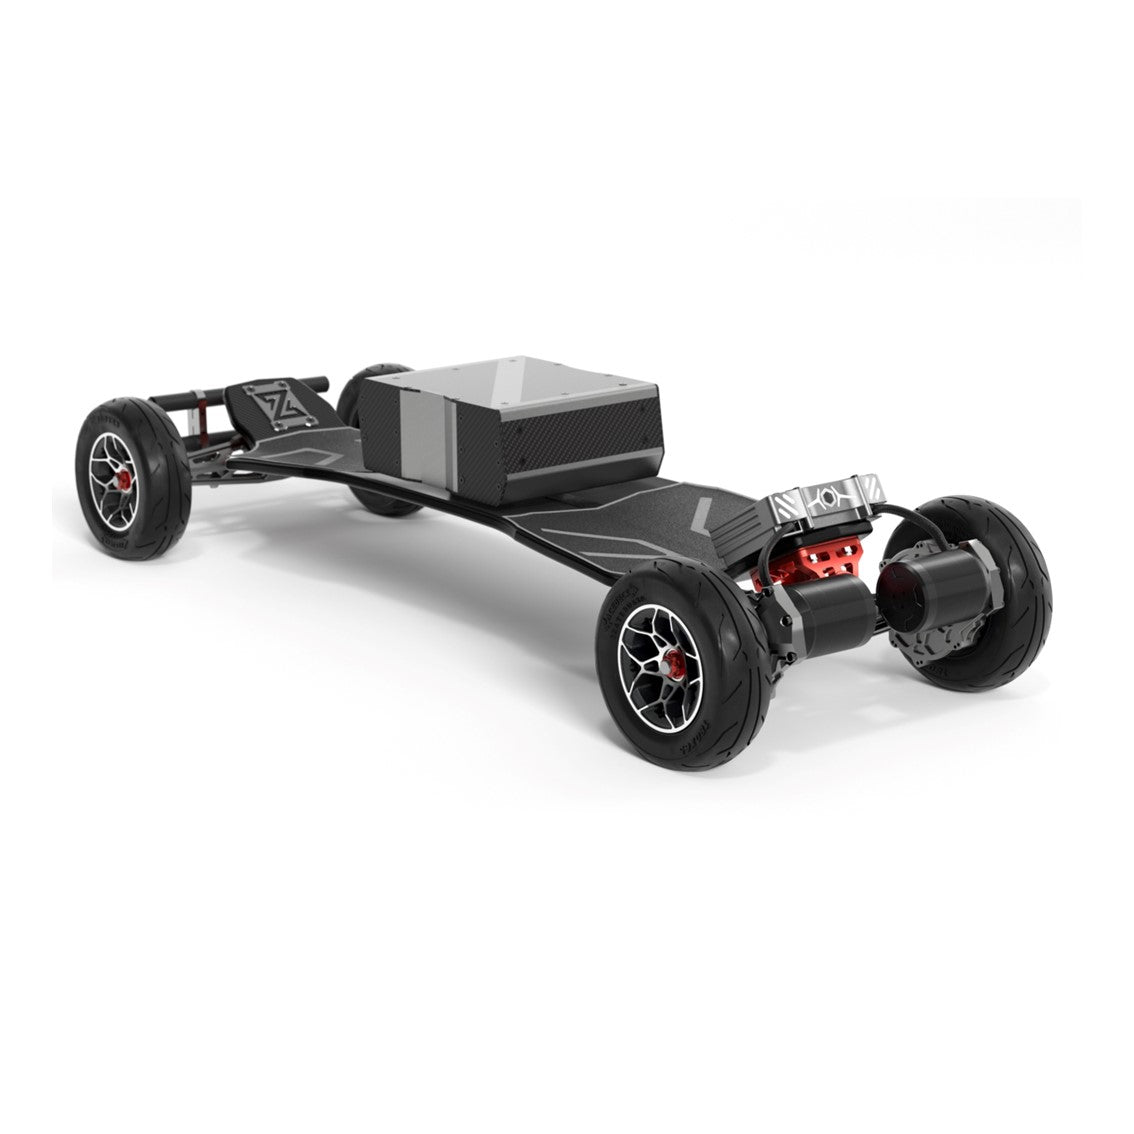 Acedeck® Nyx Z1 Off-road Electric Skateboard Street Edition